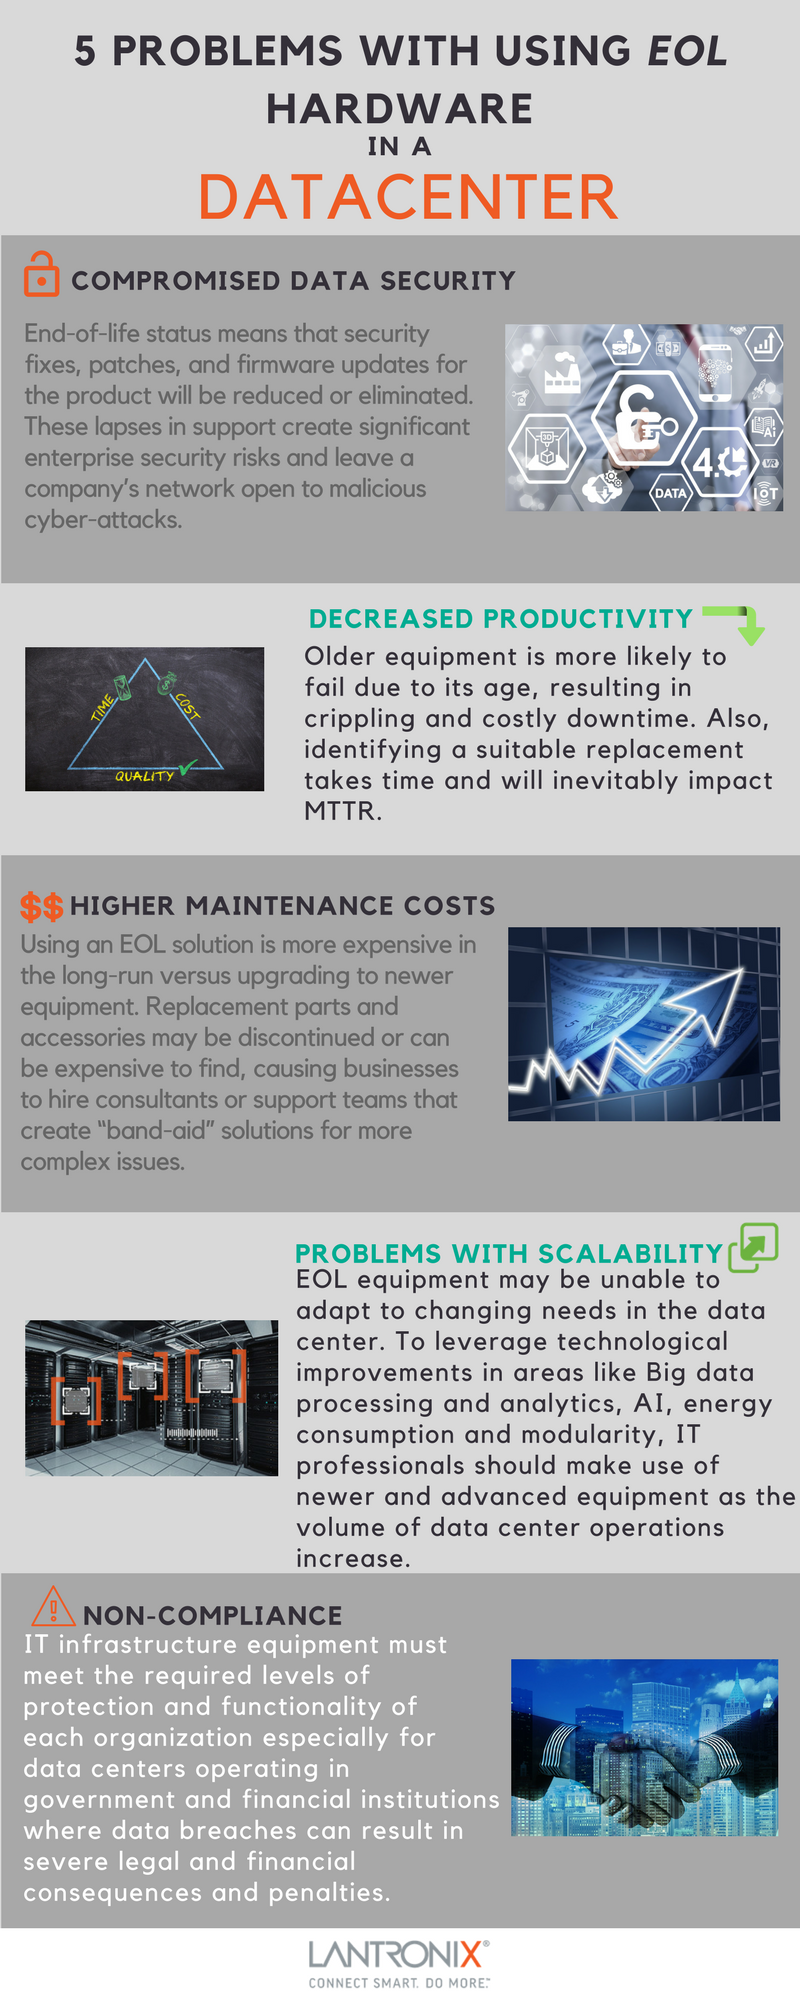 5 Problems with using EOL Hardware in a Datacenter Infographic by Lantronix